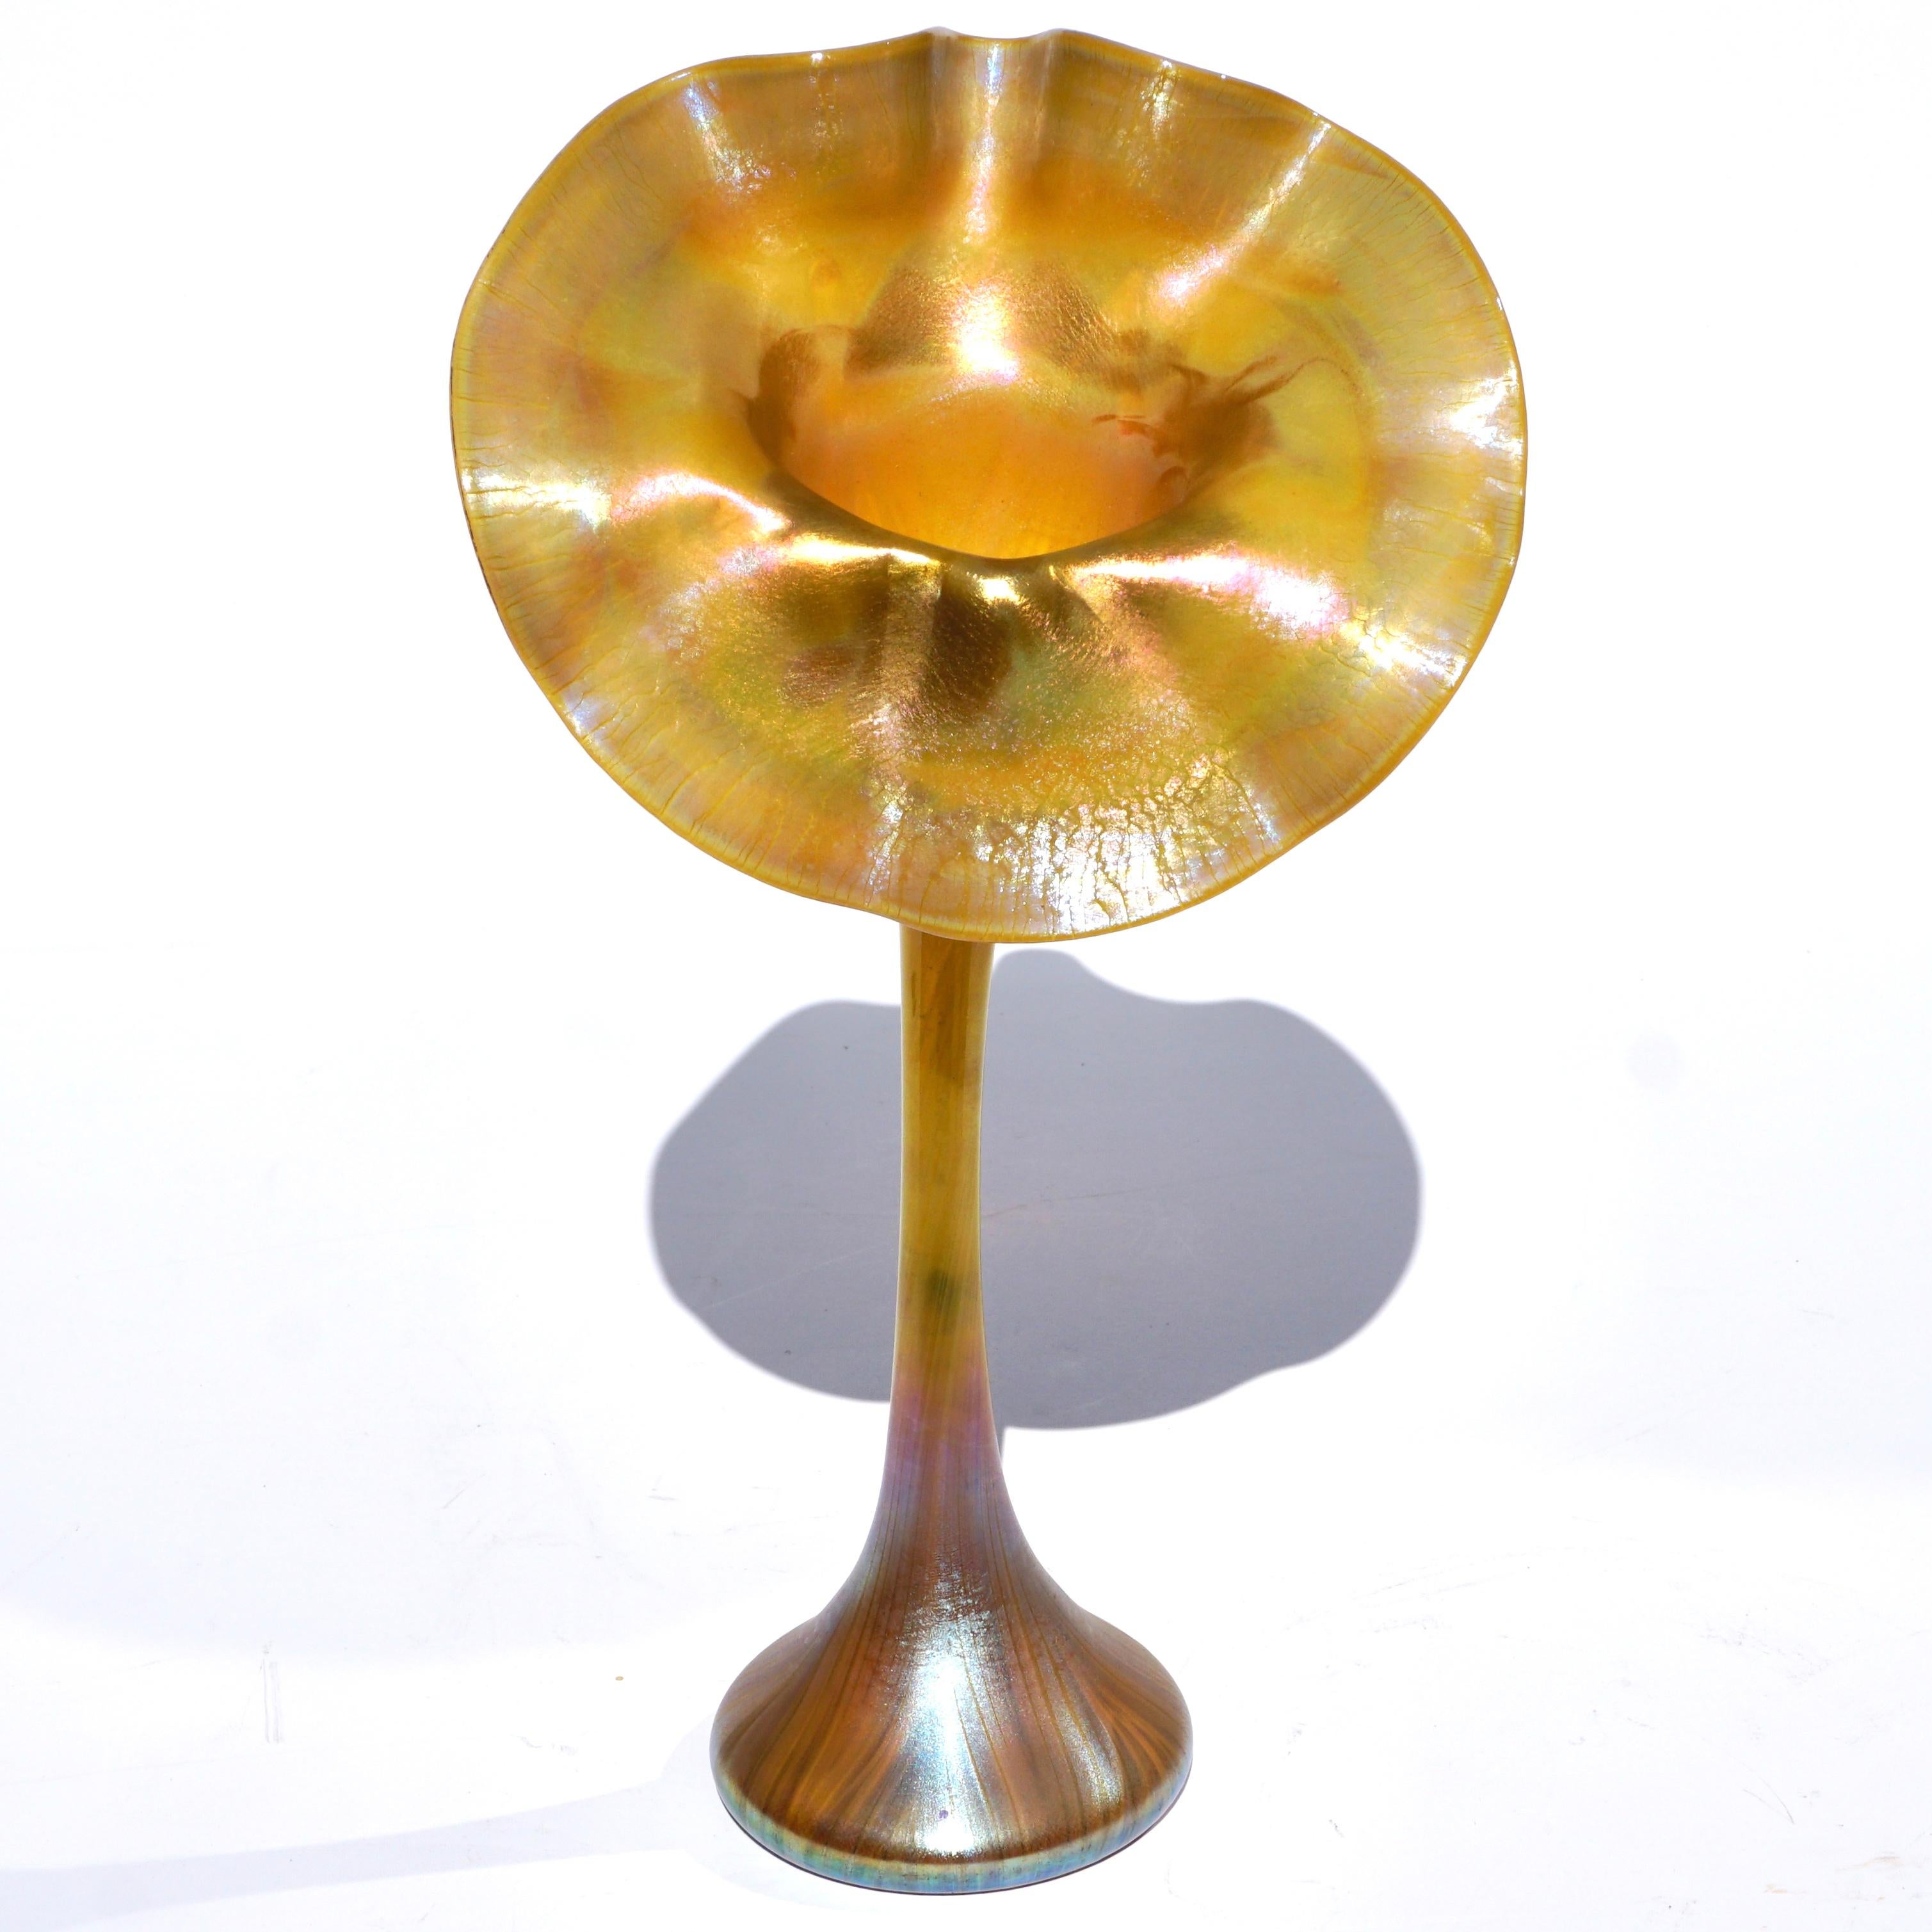 Louis Comfort Tiffany Studios Early Jack In the Pulpit vase. Circa 1895 Art Nouveau. A early and rare Favrile decorated pulled feather floriform flared iridescent vase. New York, NY

Signature: Original paper label, unsigned.

Hight: 13